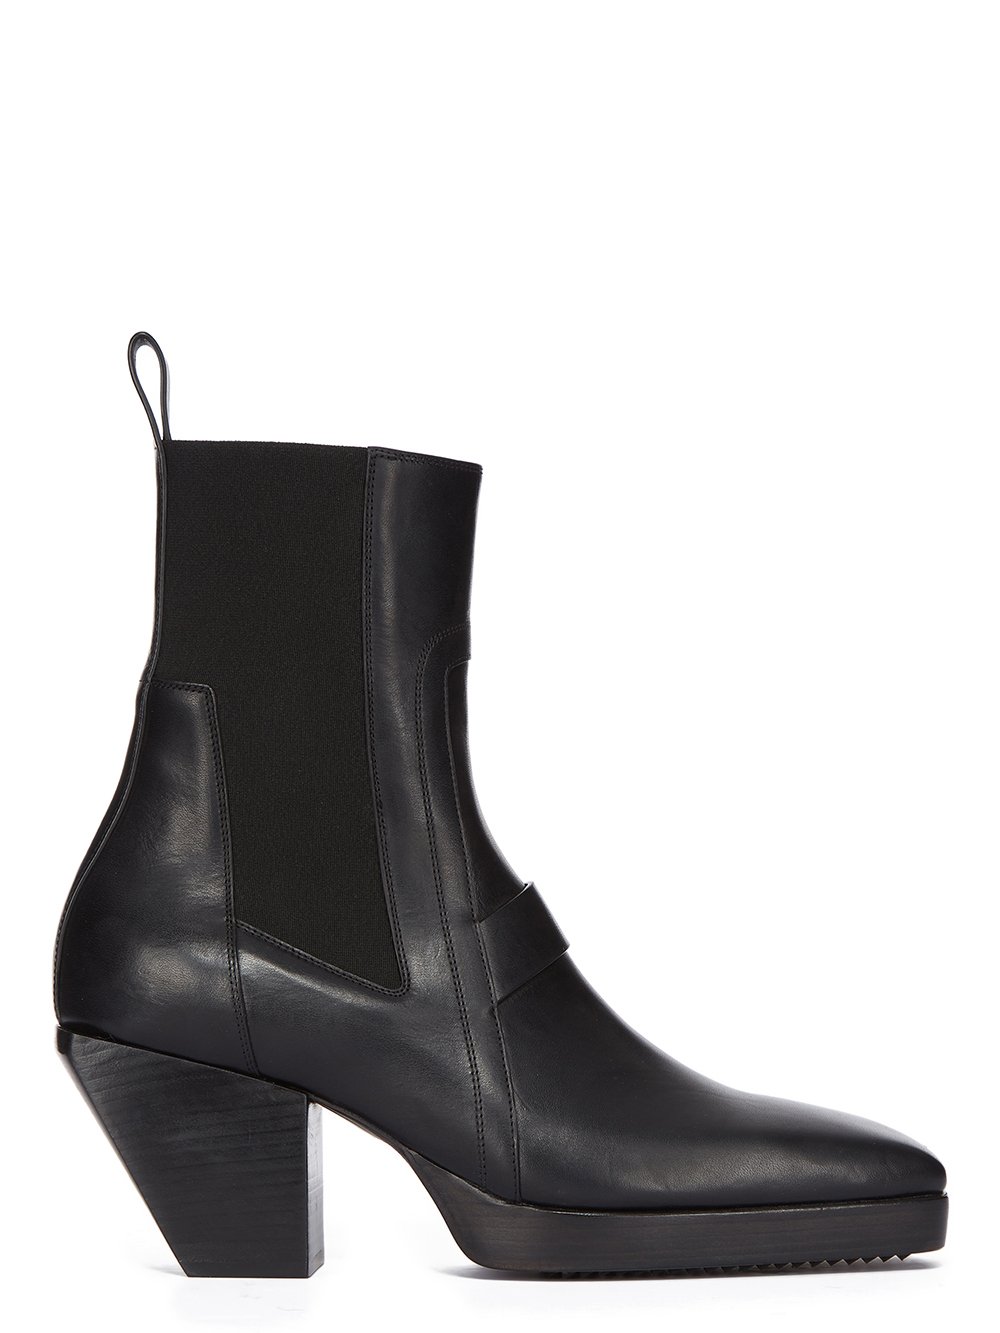 RICK OWENS FW23 LUXOR HEELED SLIVER IN BLACK GROPPONE COW LEATHER